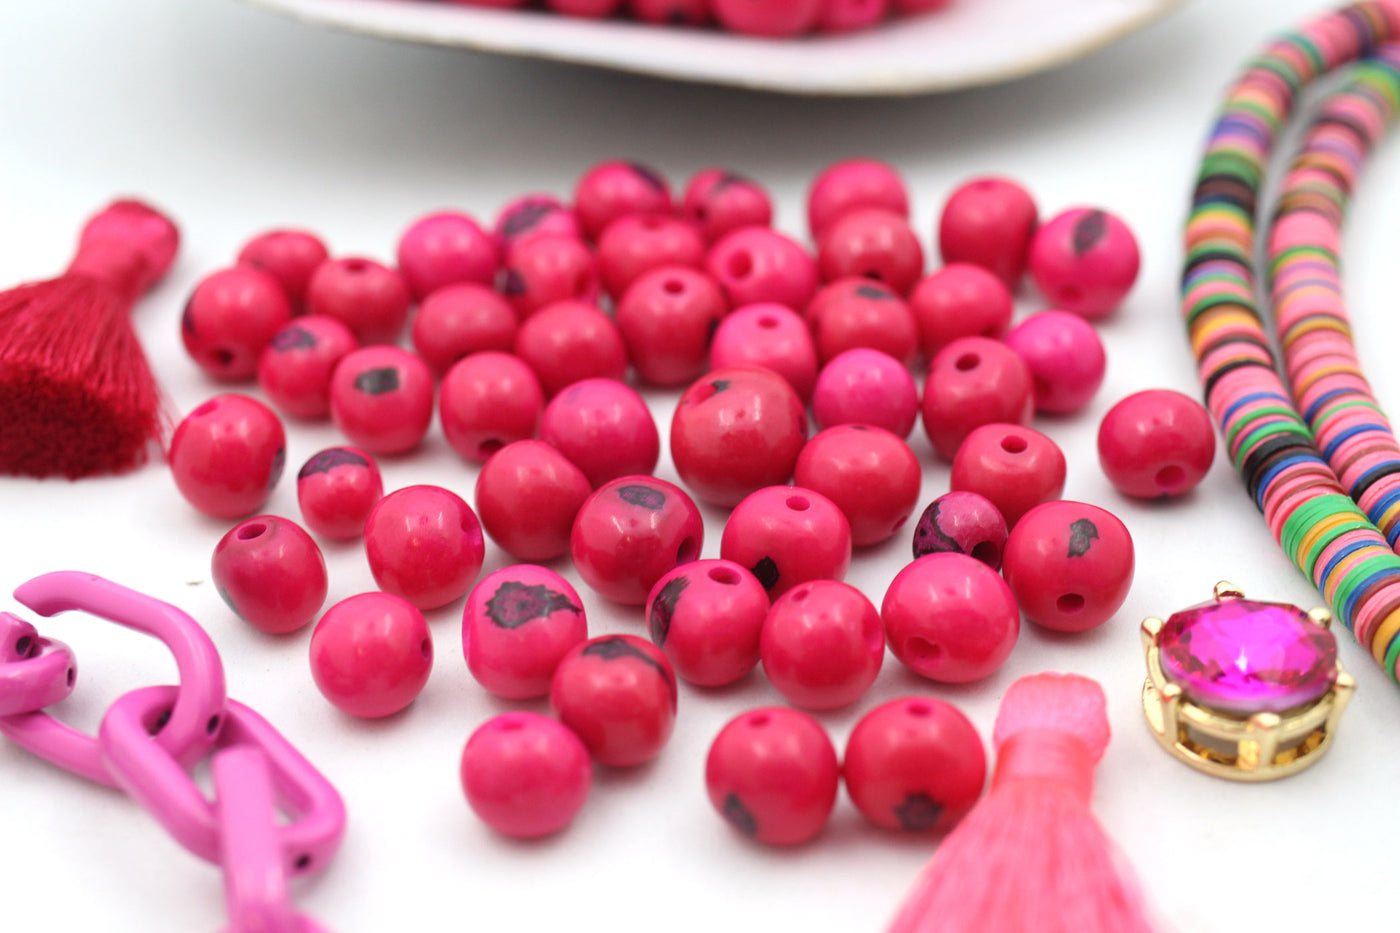 Viva Magenta Beads Easy to use in jewelry designs.